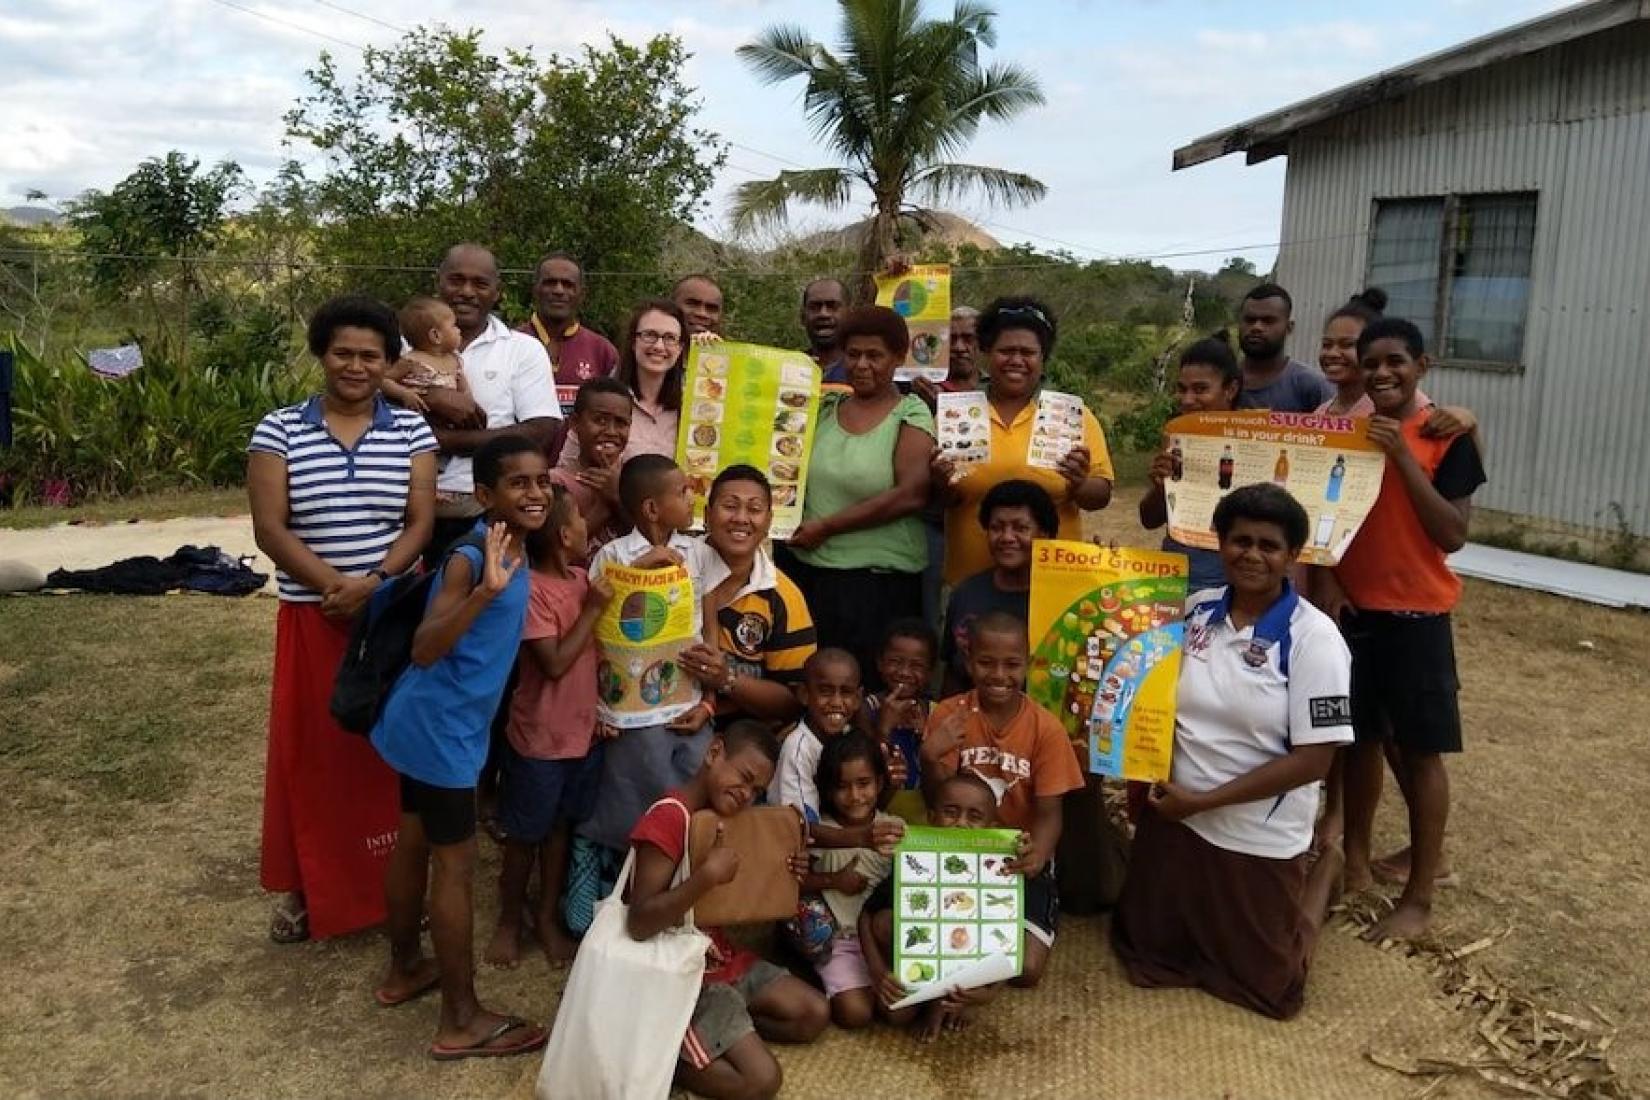 Lydia O'Meara with nutritional workshop participants in Fiji.